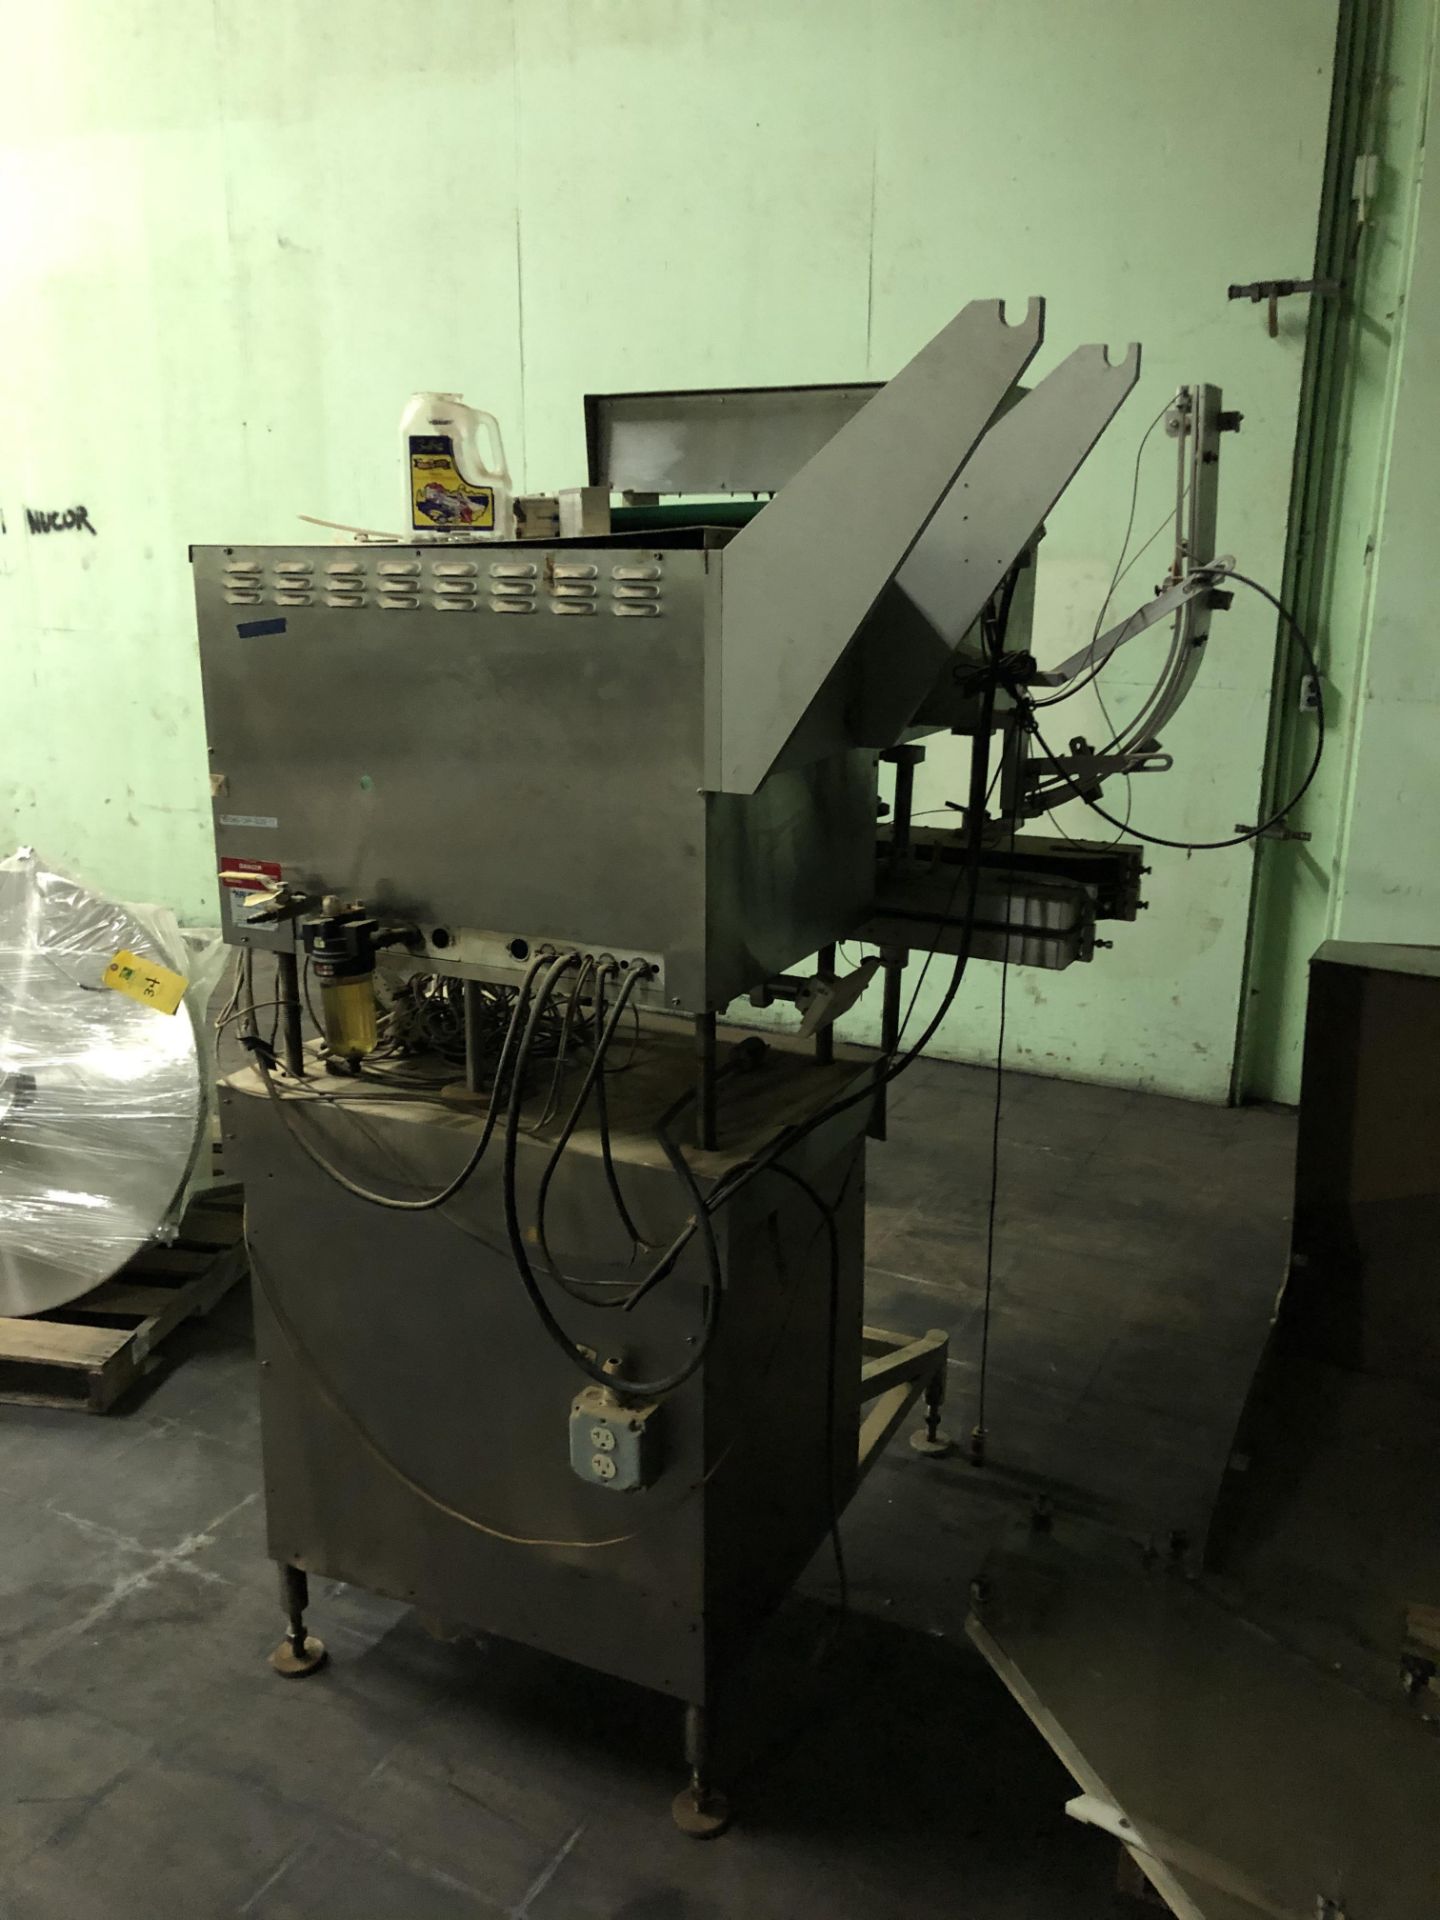 Kalish Model #5010 Supercap Capper, SN 0310, Includes Conveyor Feed, RIGGING FEE $450 - Image 4 of 6